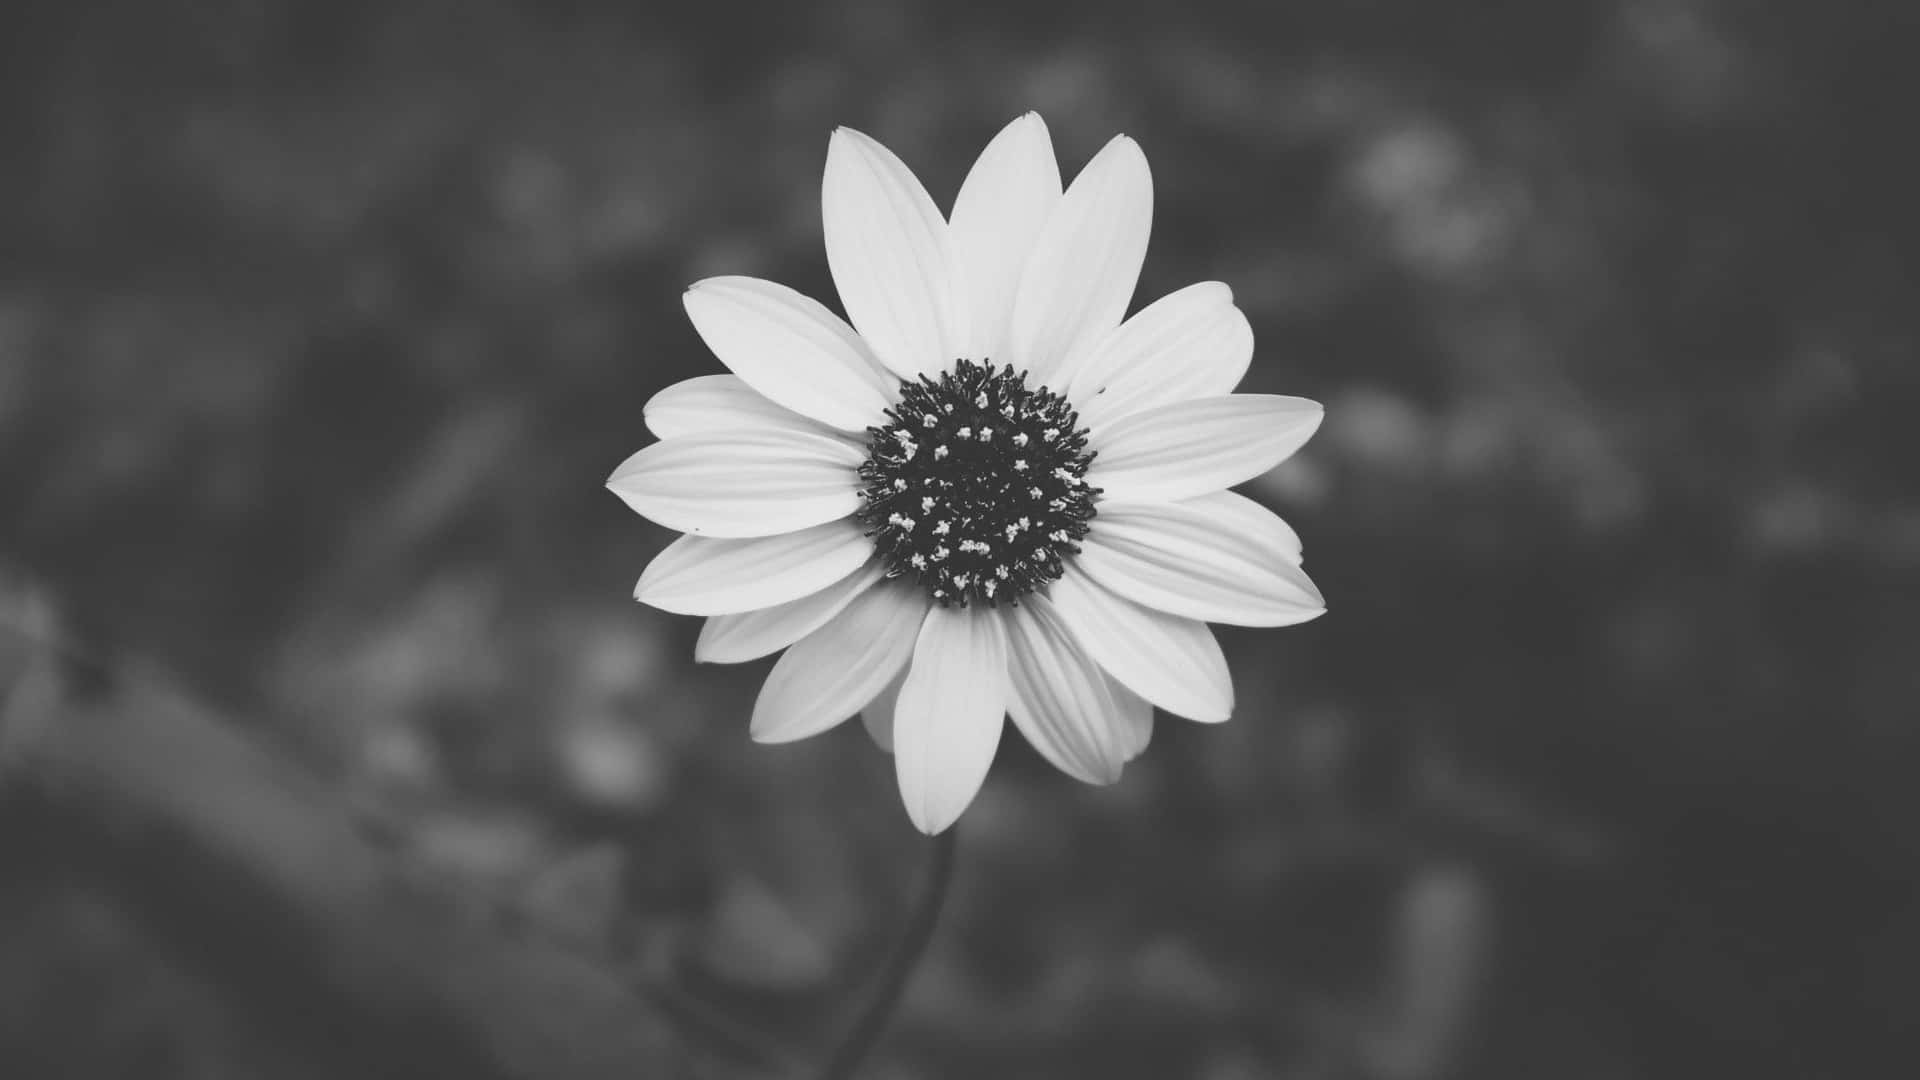 Sublime Simplicity - Black and White Aesthetic Flower Wallpaper